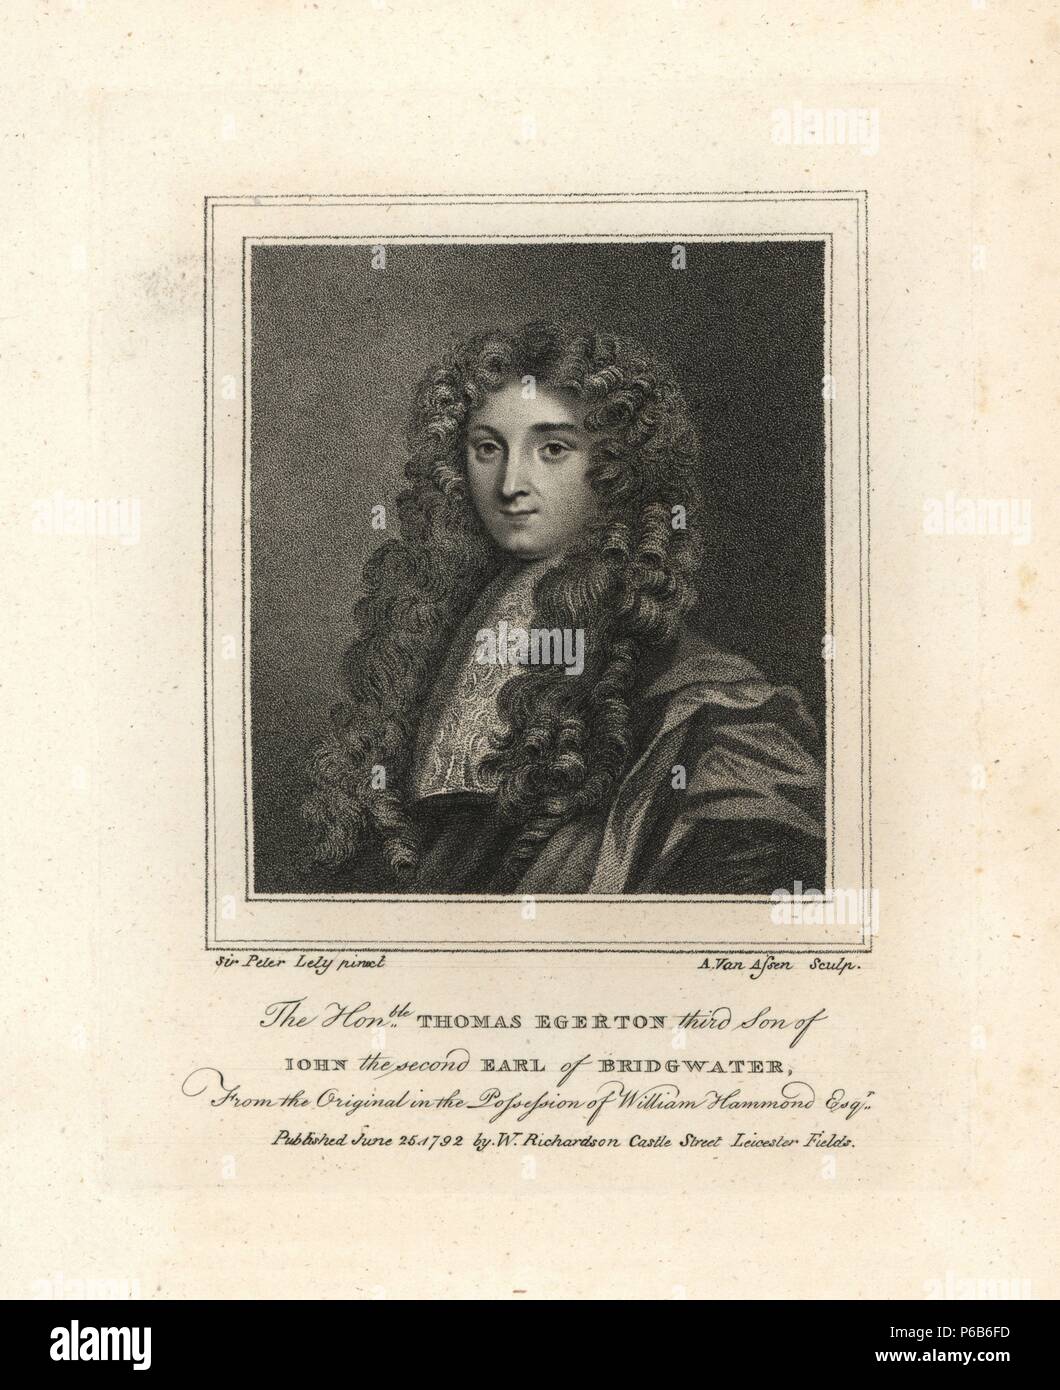 Thomas Egerton, third son of John II, Earl of Bridgewater, died 1729. From an original portrait by Sir Peter Lely in the possession of William Hammond. Copperplate engraving from Richardson's 'Portraits illustrating Granger's Biographical History of England,' London, 1792–1812. Published by William Richardson, printseller, London. James Granger (1723–1776) was an English clergyman, biographer, and print collector. Stock Photo